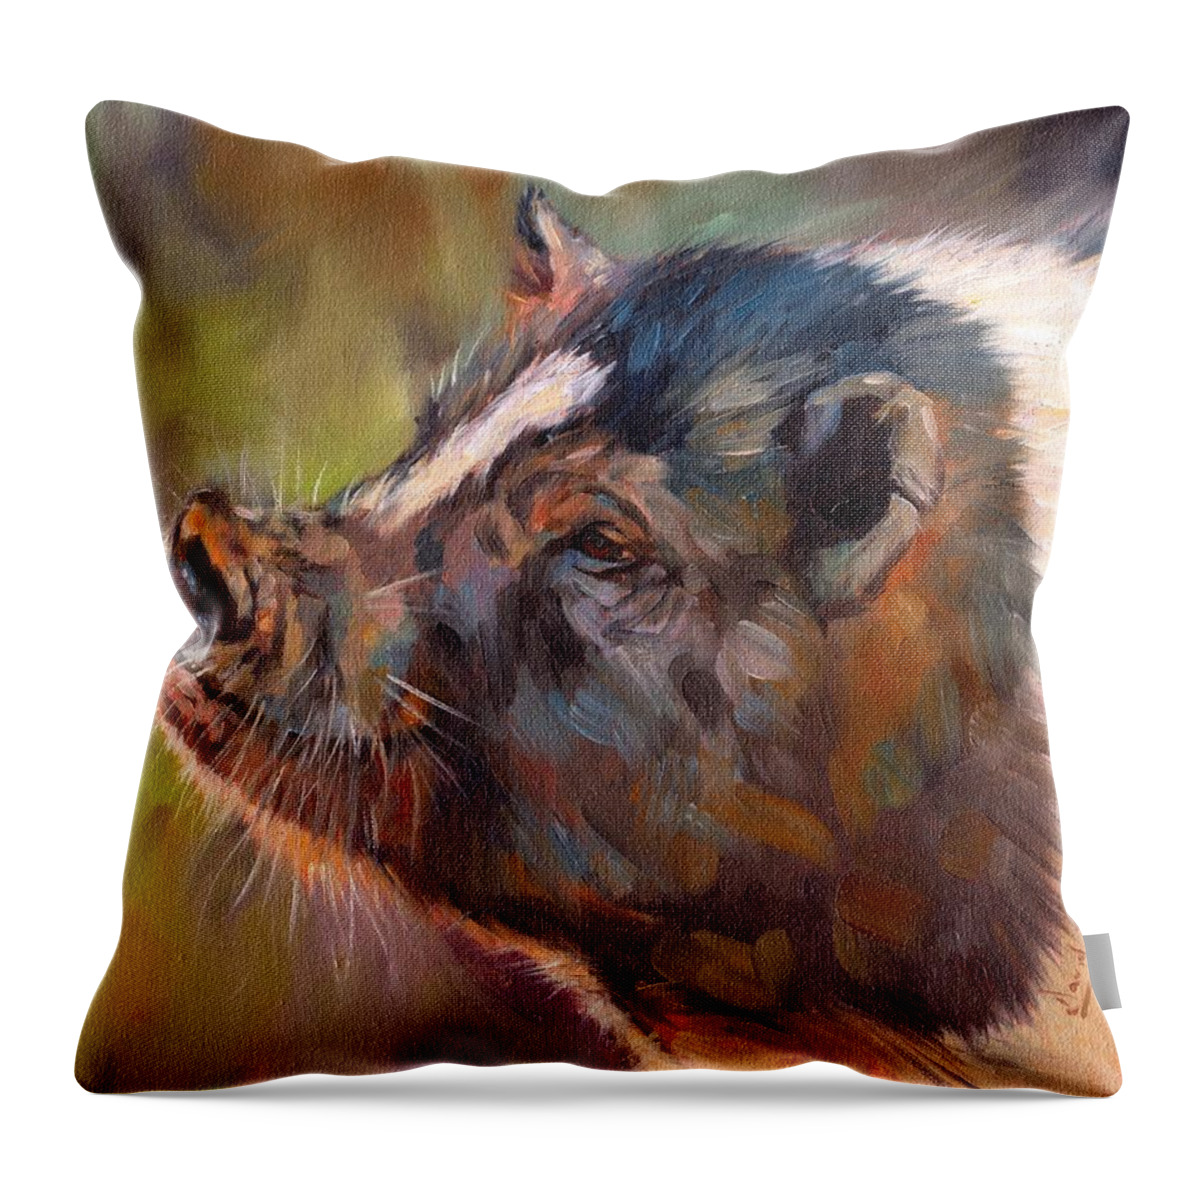 Pig Throw Pillow featuring the painting Pig by David Stribbling